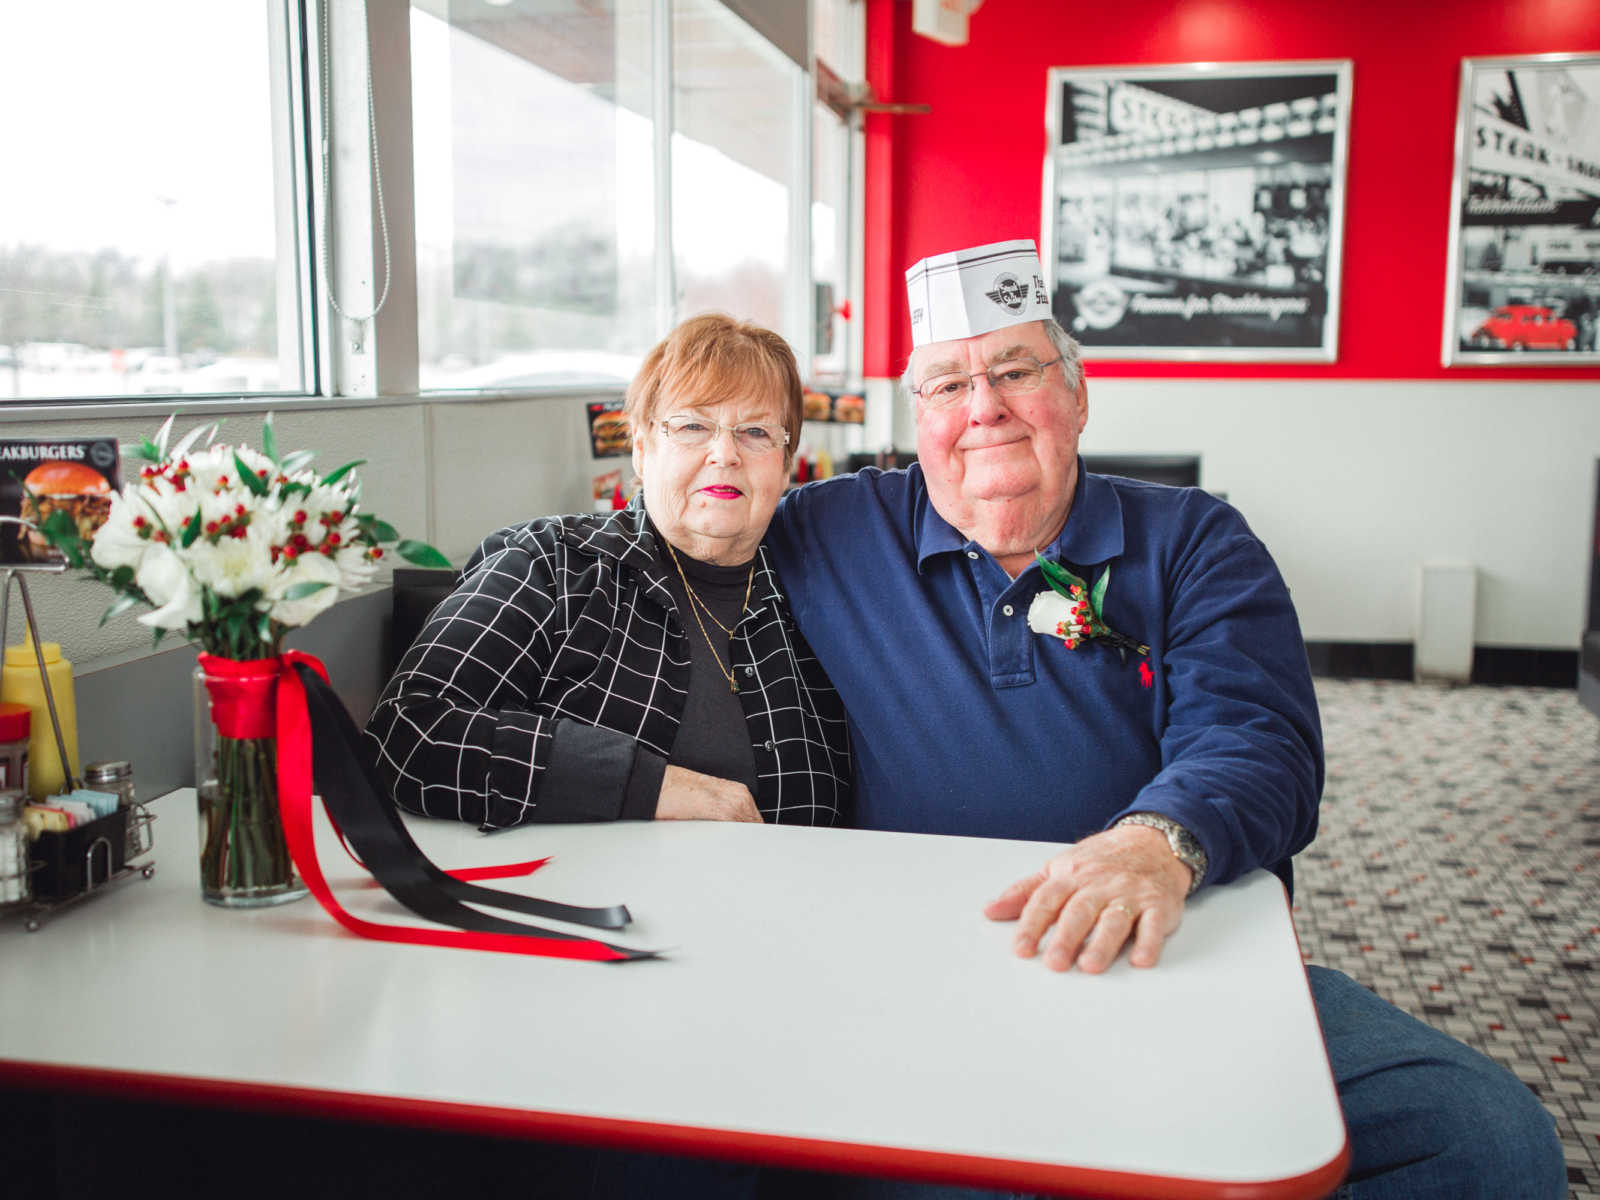 Couple who met at Steak 'n Shake in 1962 smile in booth while husband wears paper hat